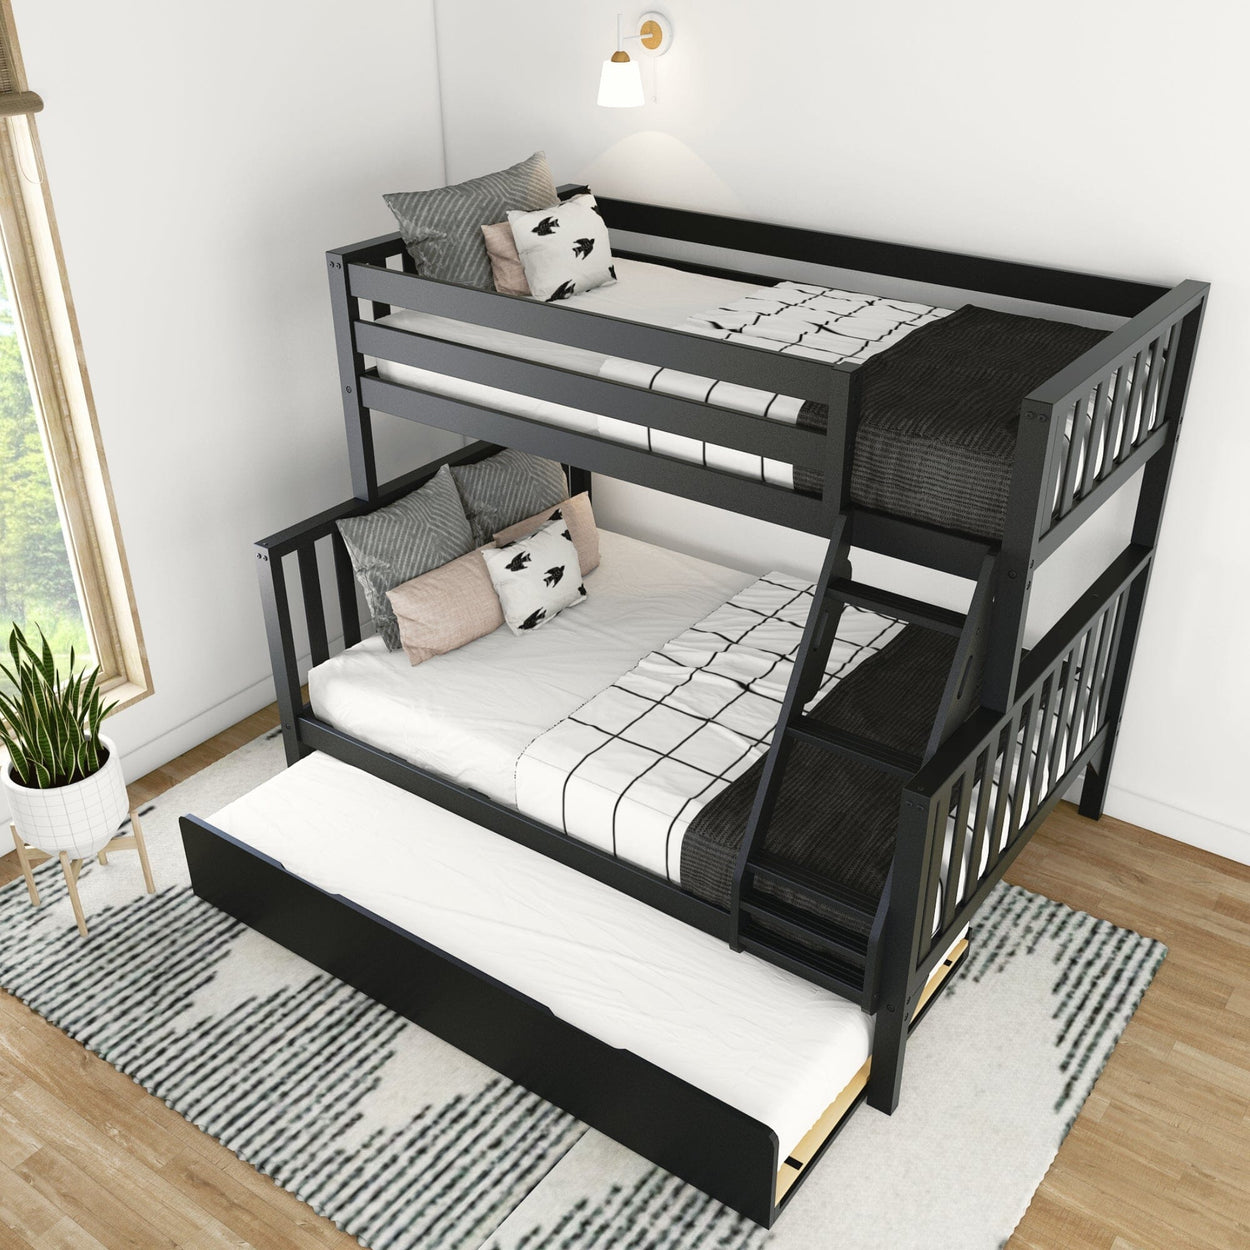 216231-170 : Bunk Beds Scandinavian Twin over Full Bunk Bed with Twin-Size Trundle, Black